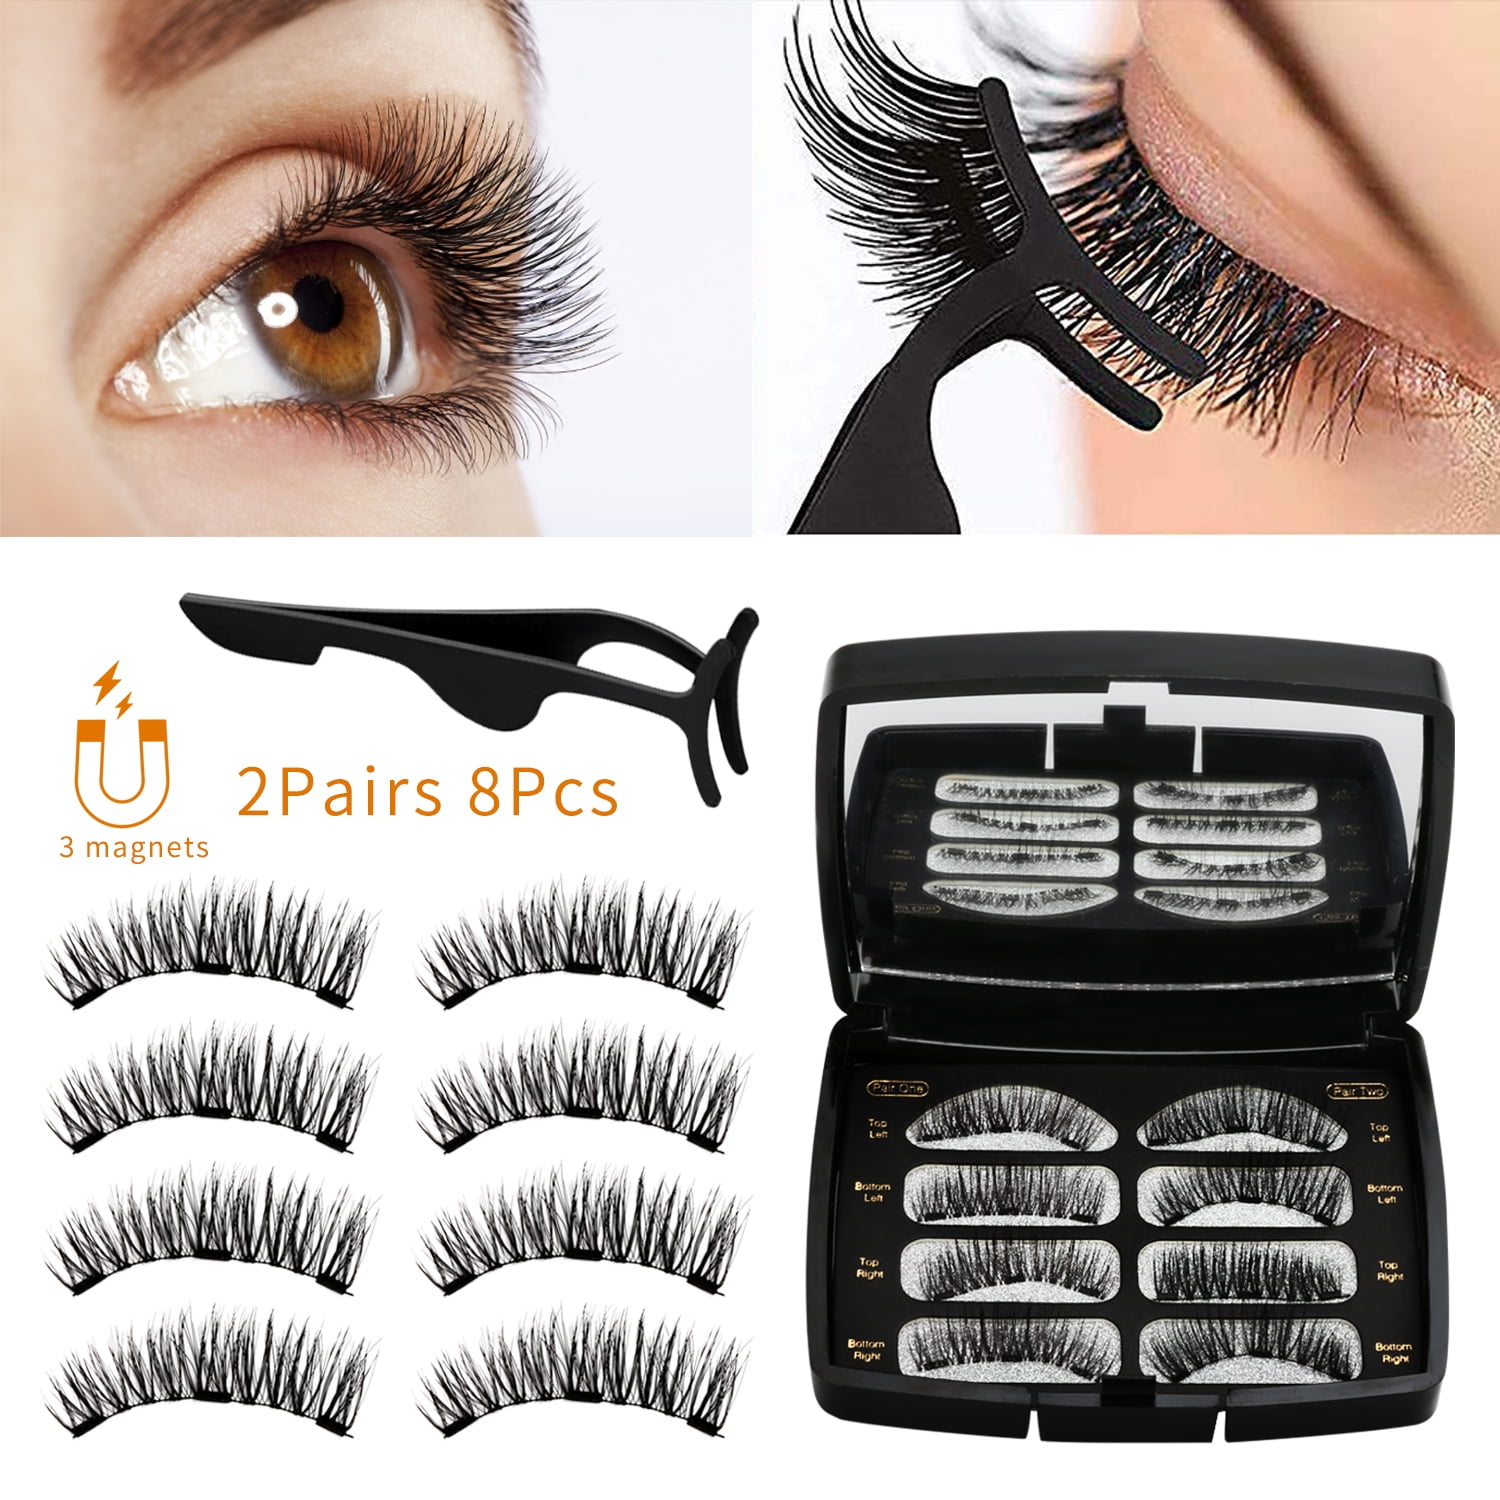 Allnice 2 Magnetic Eyelashes Dual Magnets False Eyelashes Reusable 3D No Glue 3 Fake Lashes Extension with for Women Makeup, 8 Pieces -